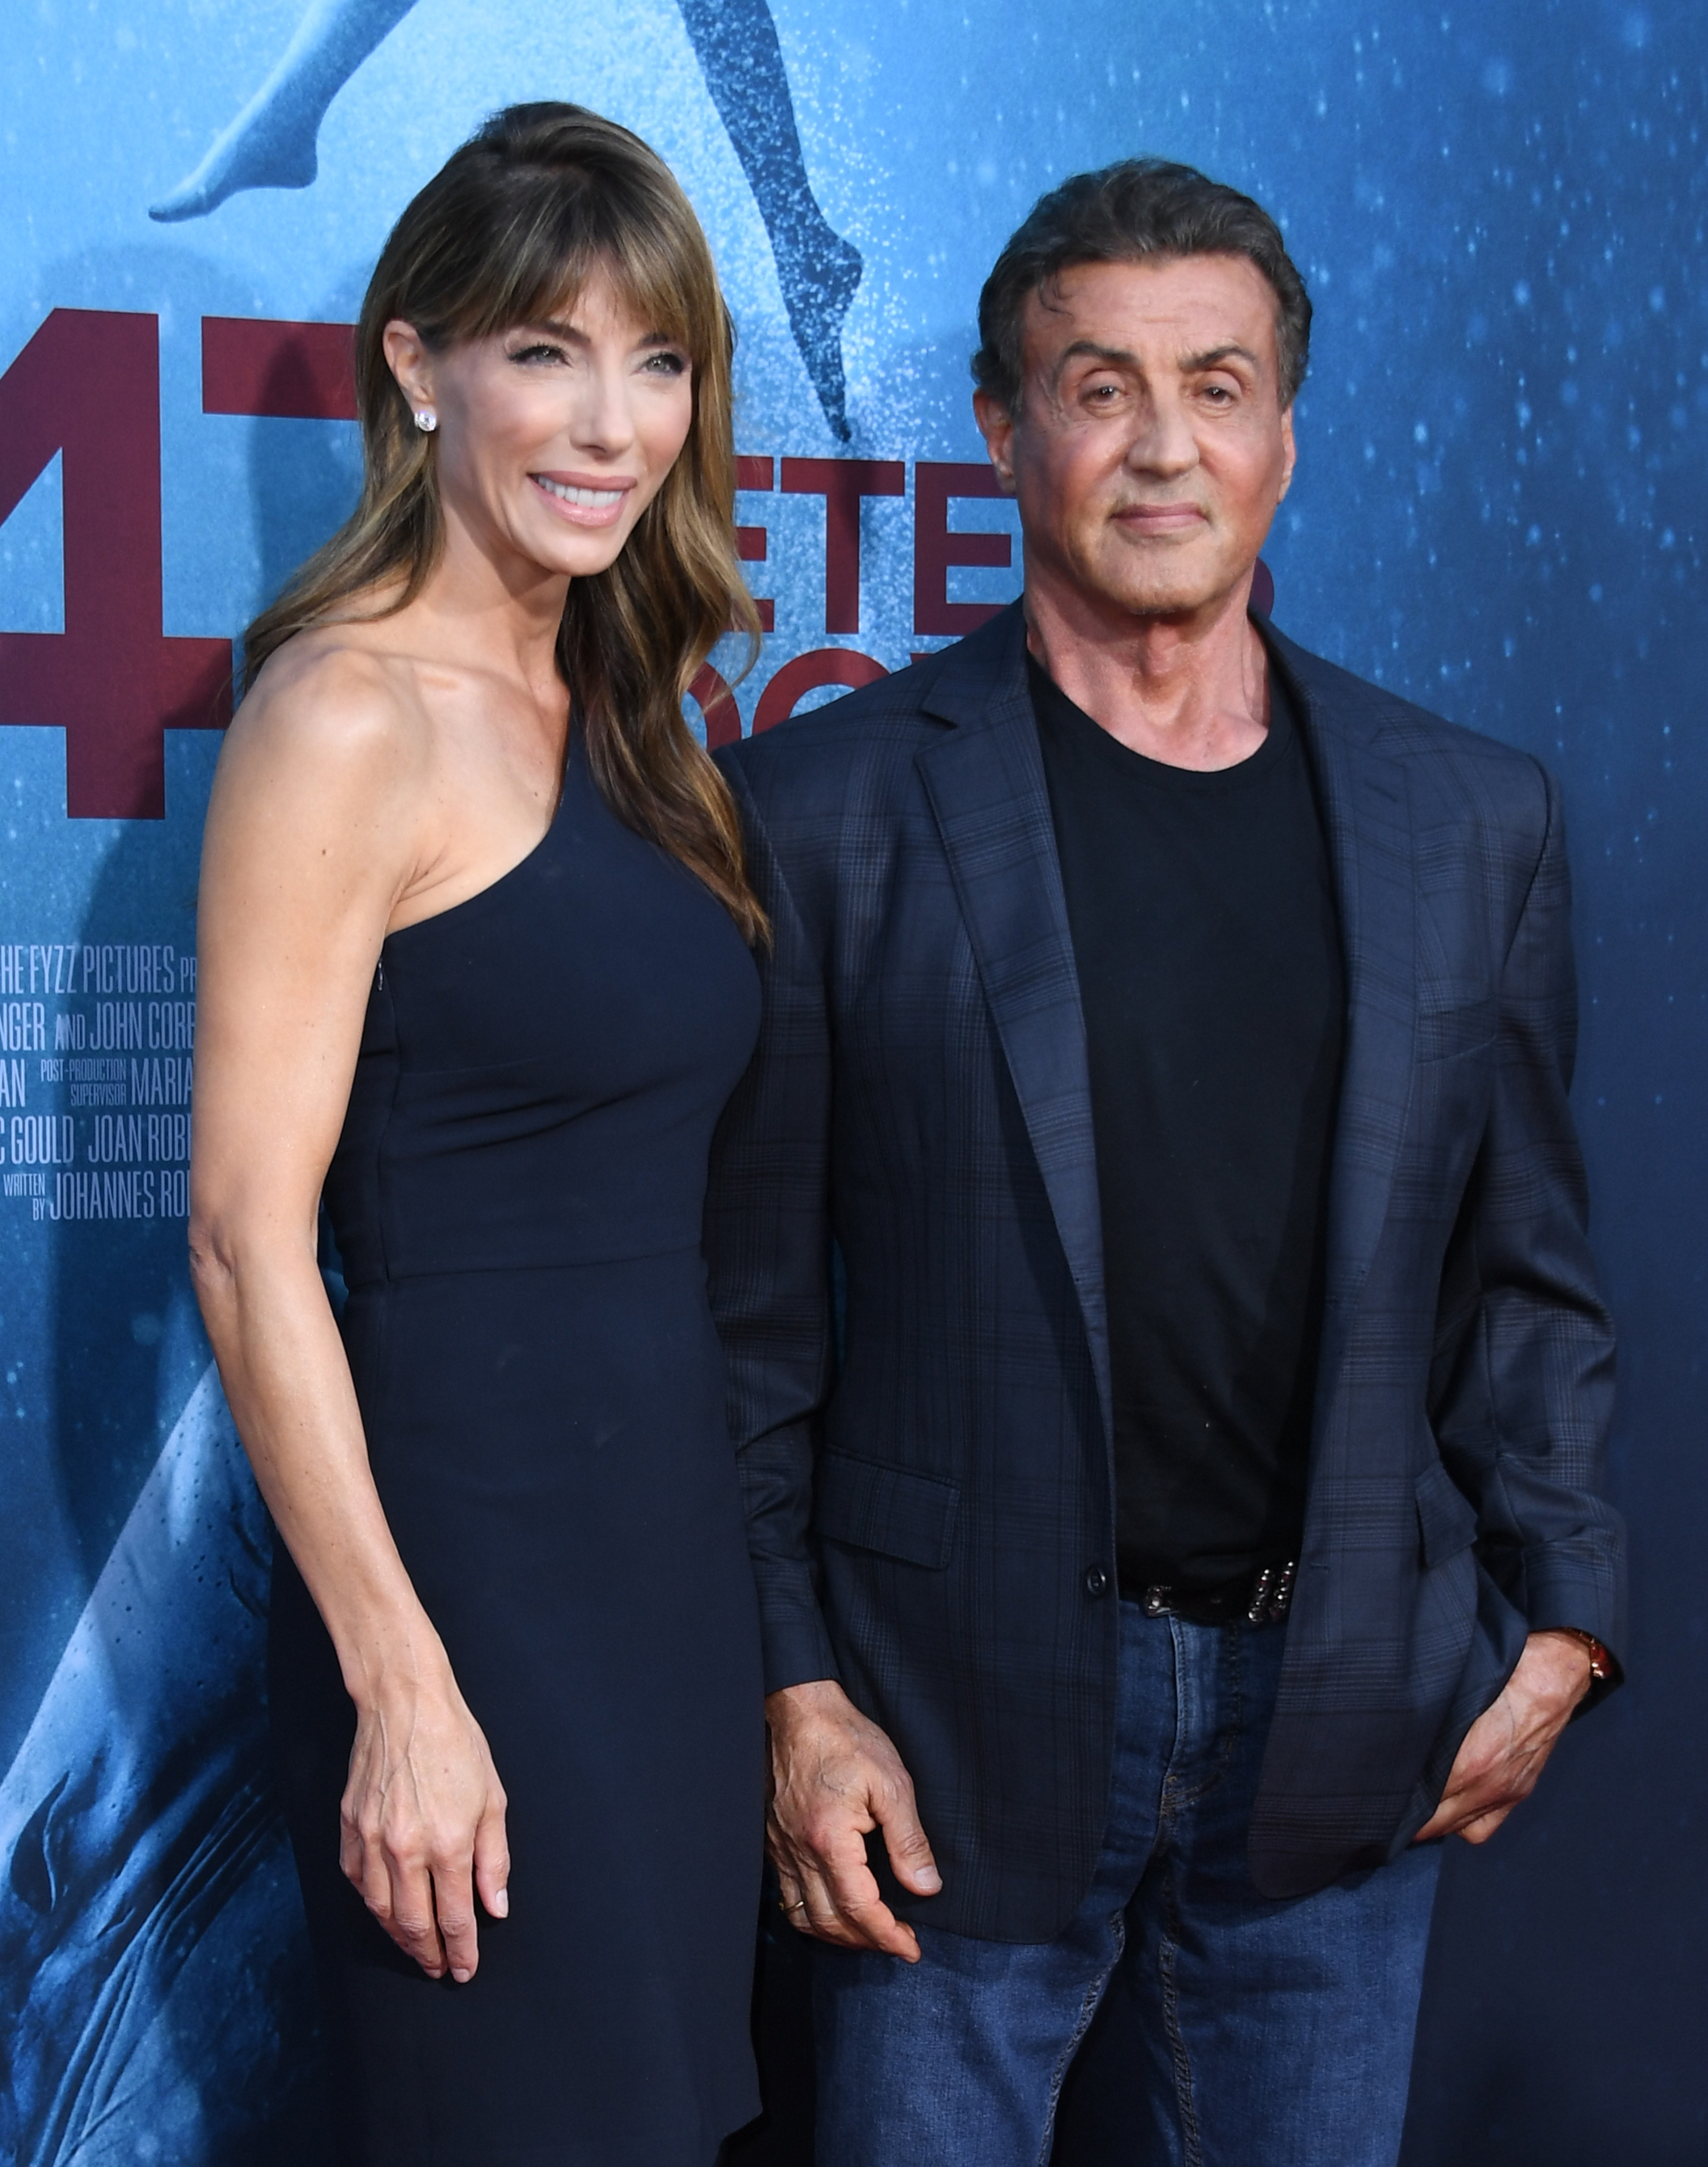 Sylvester was also accused of saying he wanted pretty young girls around him, but his wife, Jennifer Flavin (left), was on set and claimed that he never said that